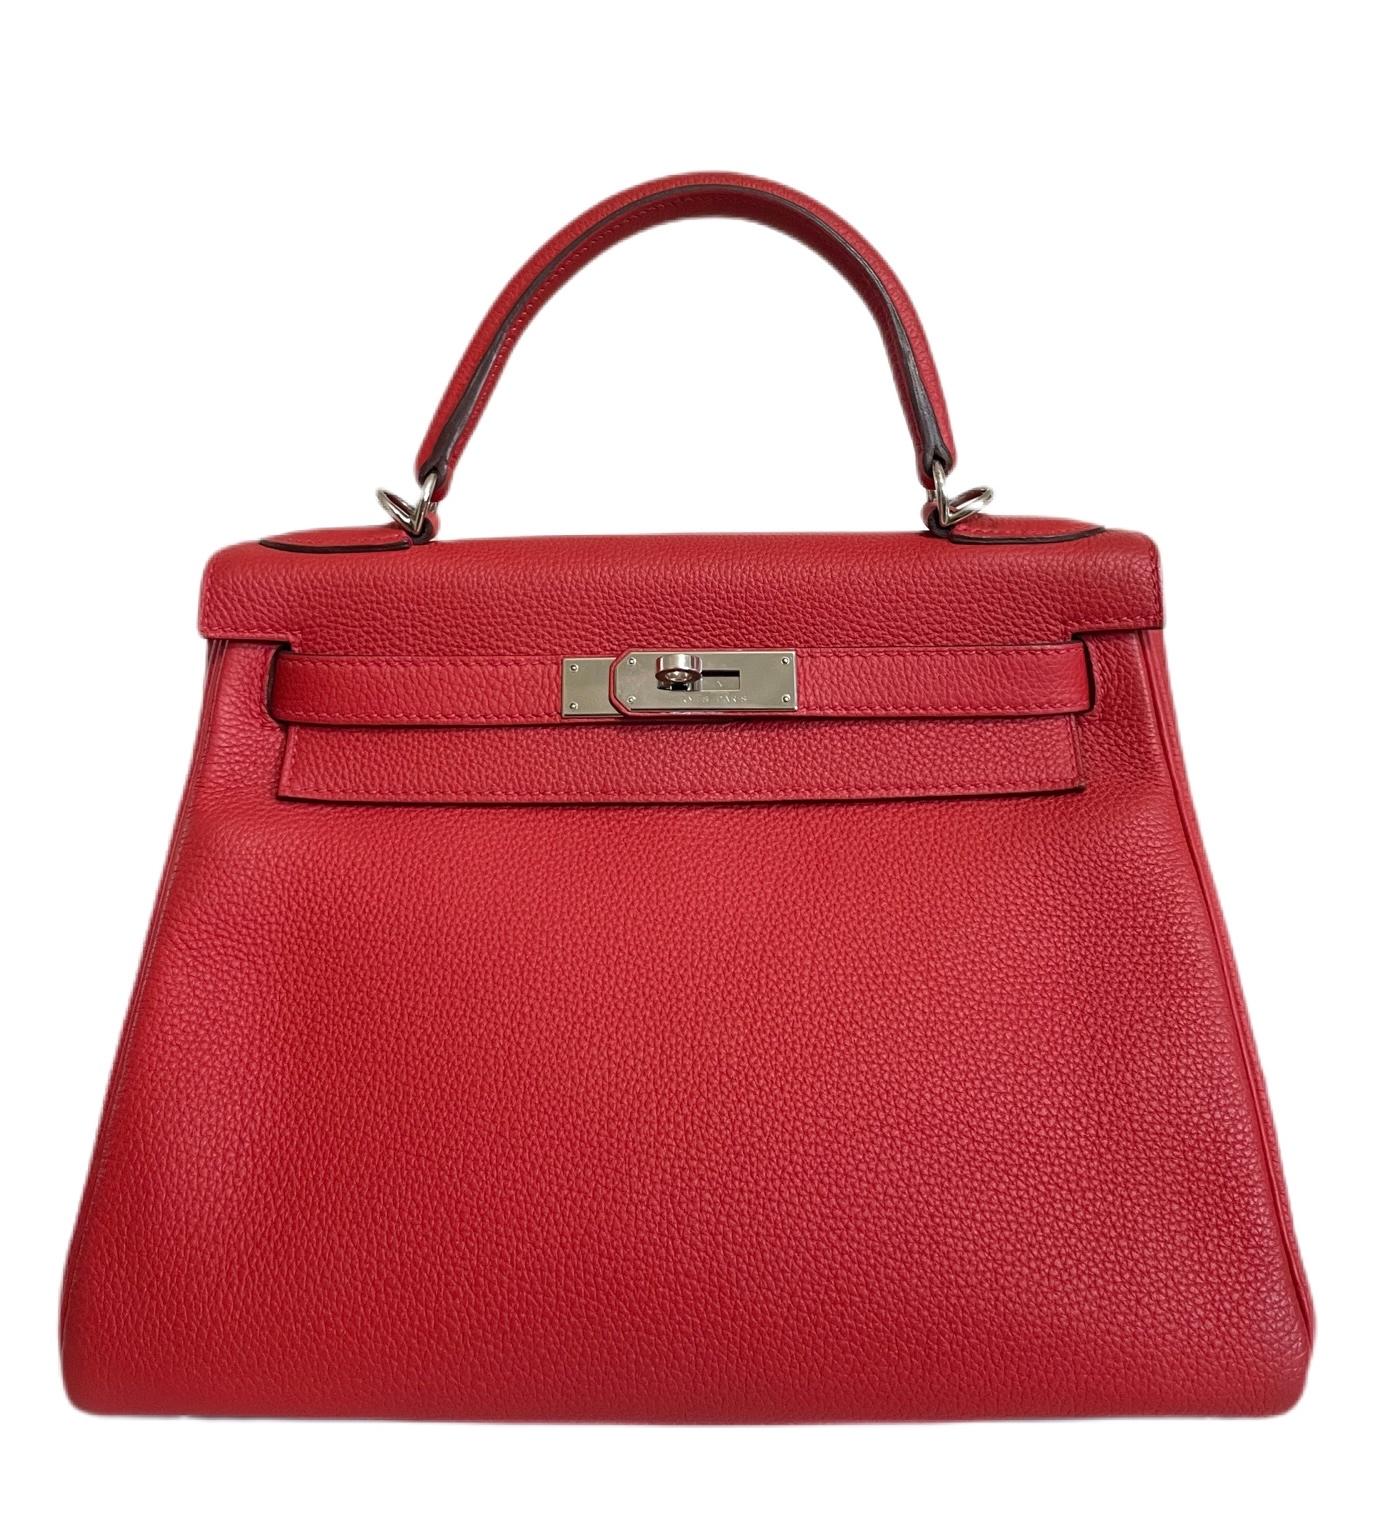 Hermes Kelly 28 Red Togo Palladium Hardware Palladium Hardware. X stamp 2016. Excellent Condition, hairlines on hardware, Excellent corners and structure. 

Shop with confidence from Lux Addicts. Authenticity guaranteed!